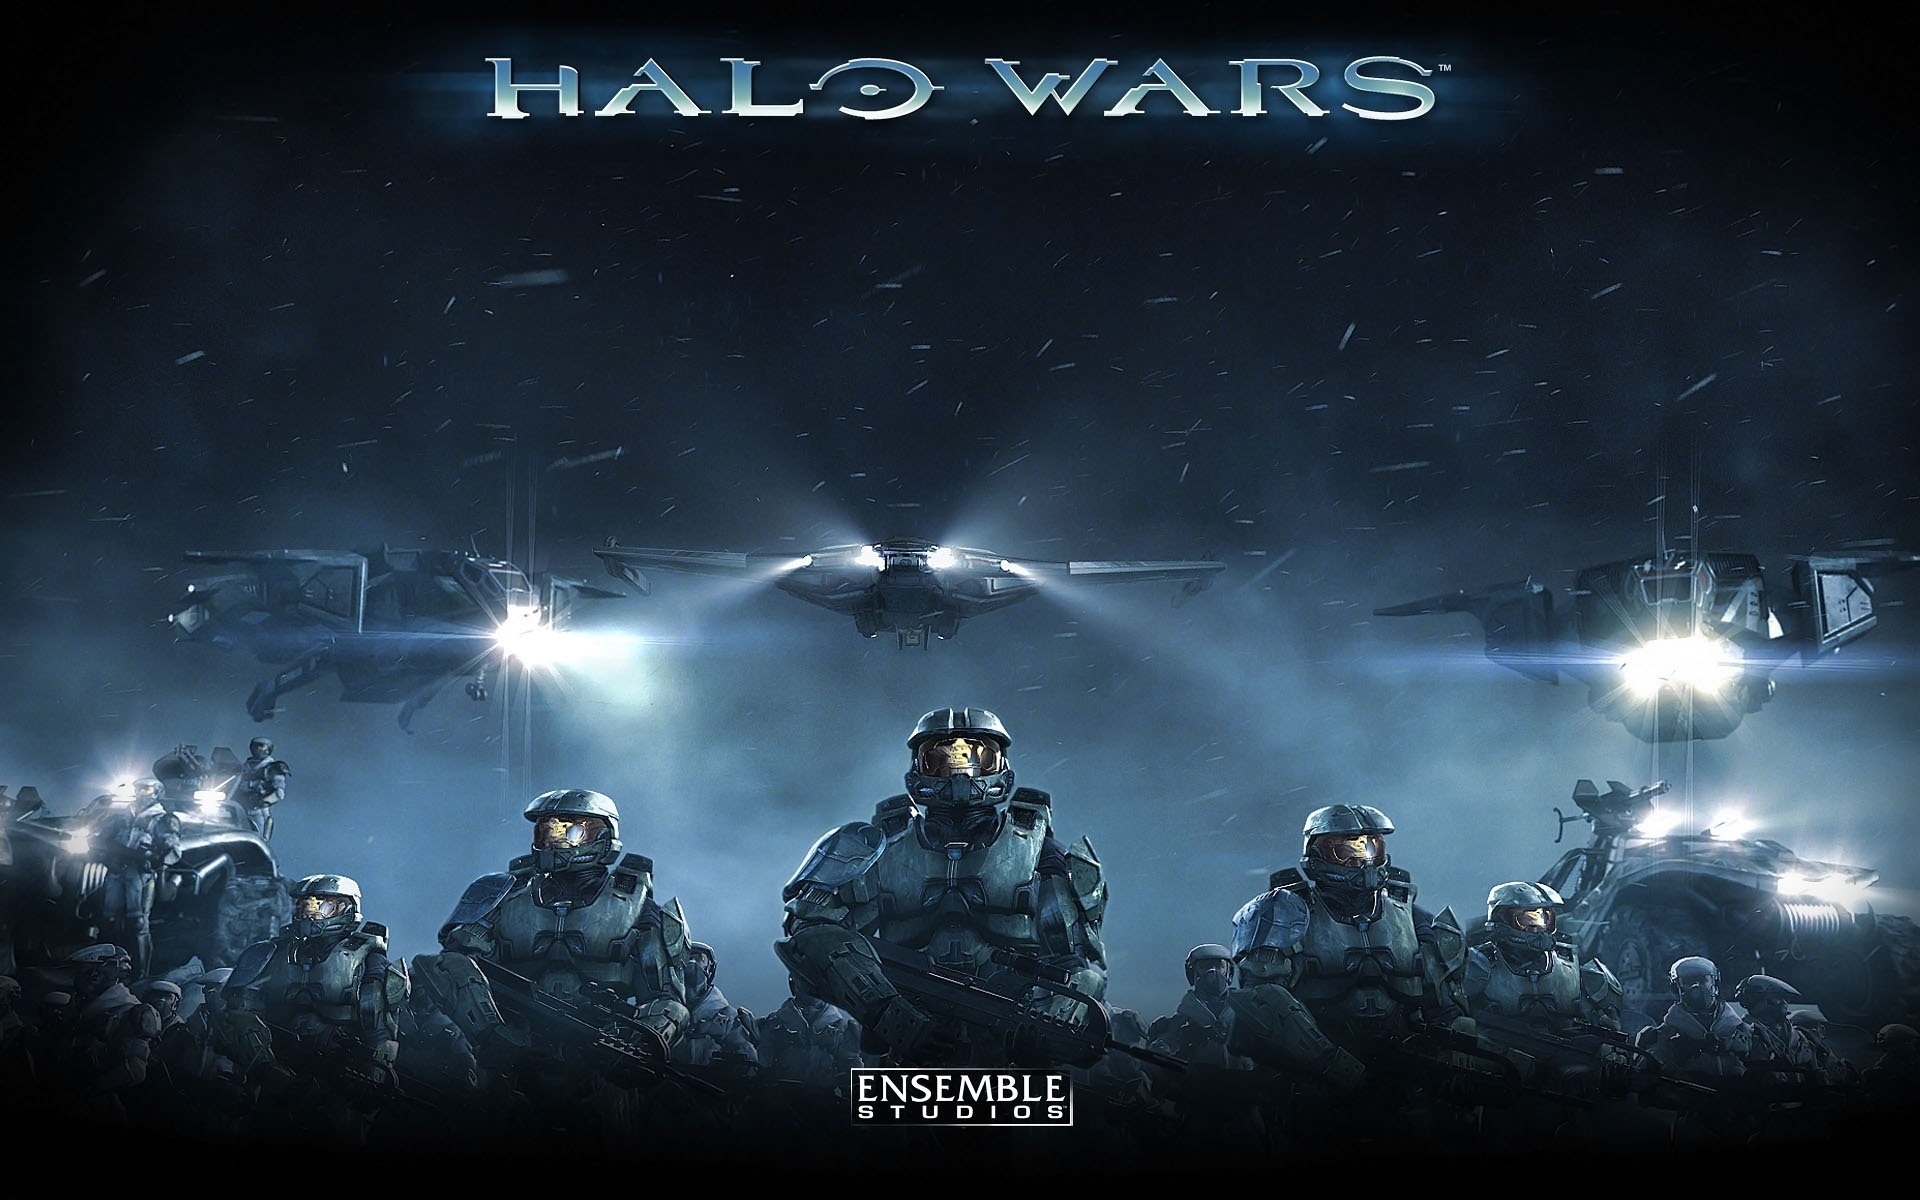 Halo game HD wallpapers #28 - 1920x1200